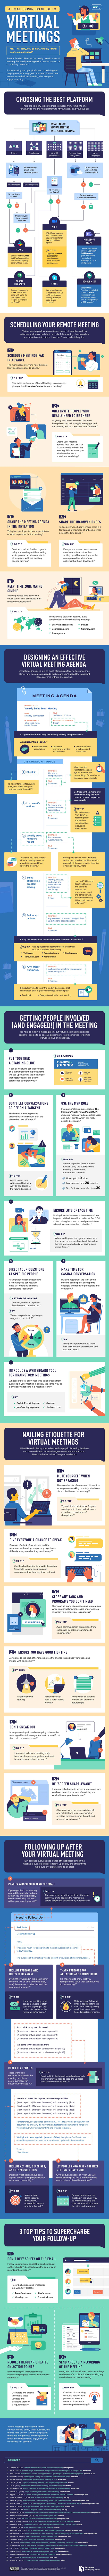 An infographic giving tips for more efficient remote meetings.